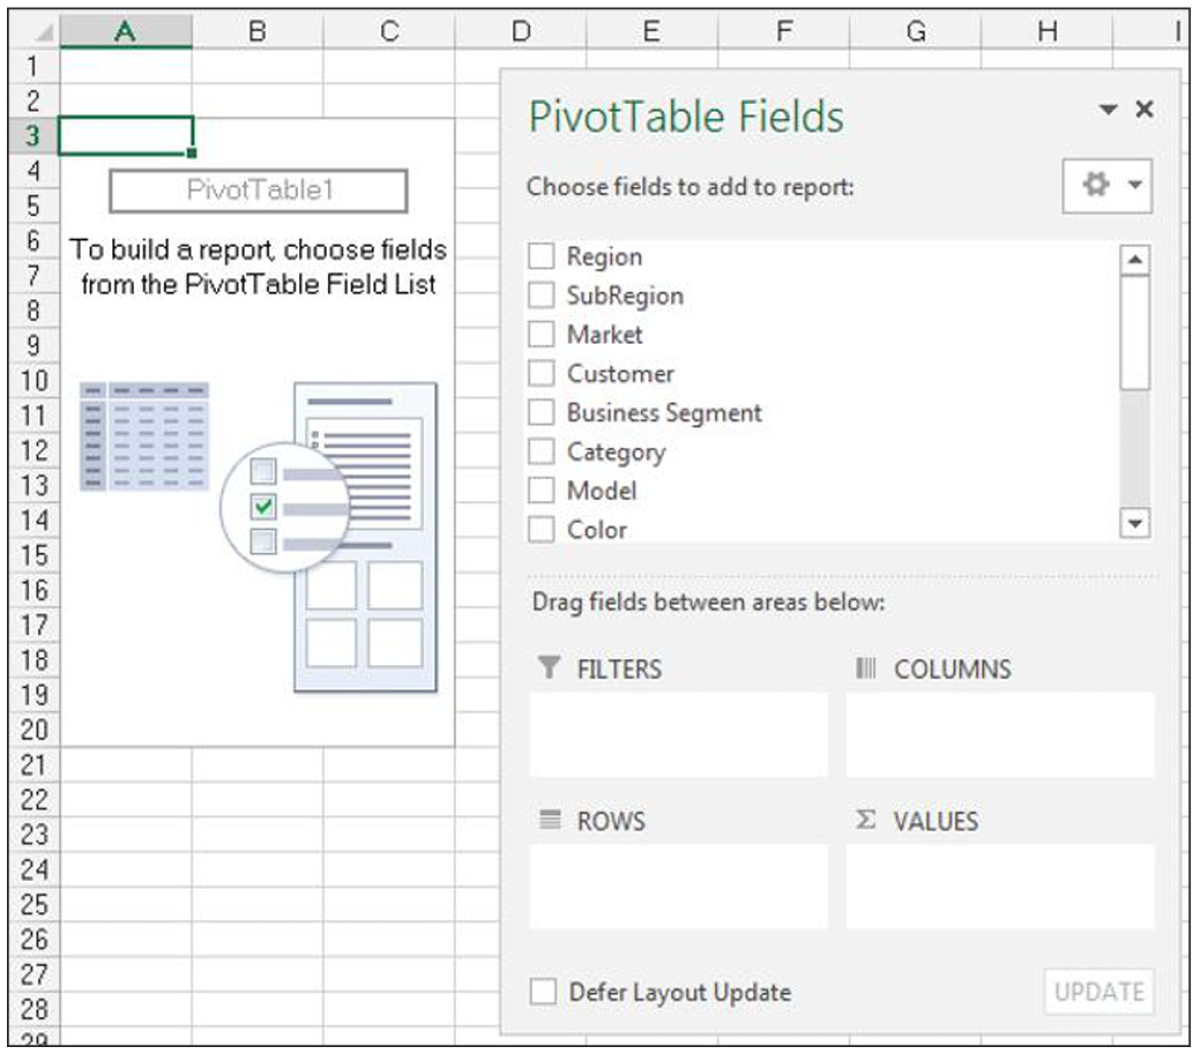 After the PivotTable is created, the Excel user is given options to set up the PivotTable. Each field that is reported needs to be categorized as either a row, column, filter, or value to create the PivotTable.